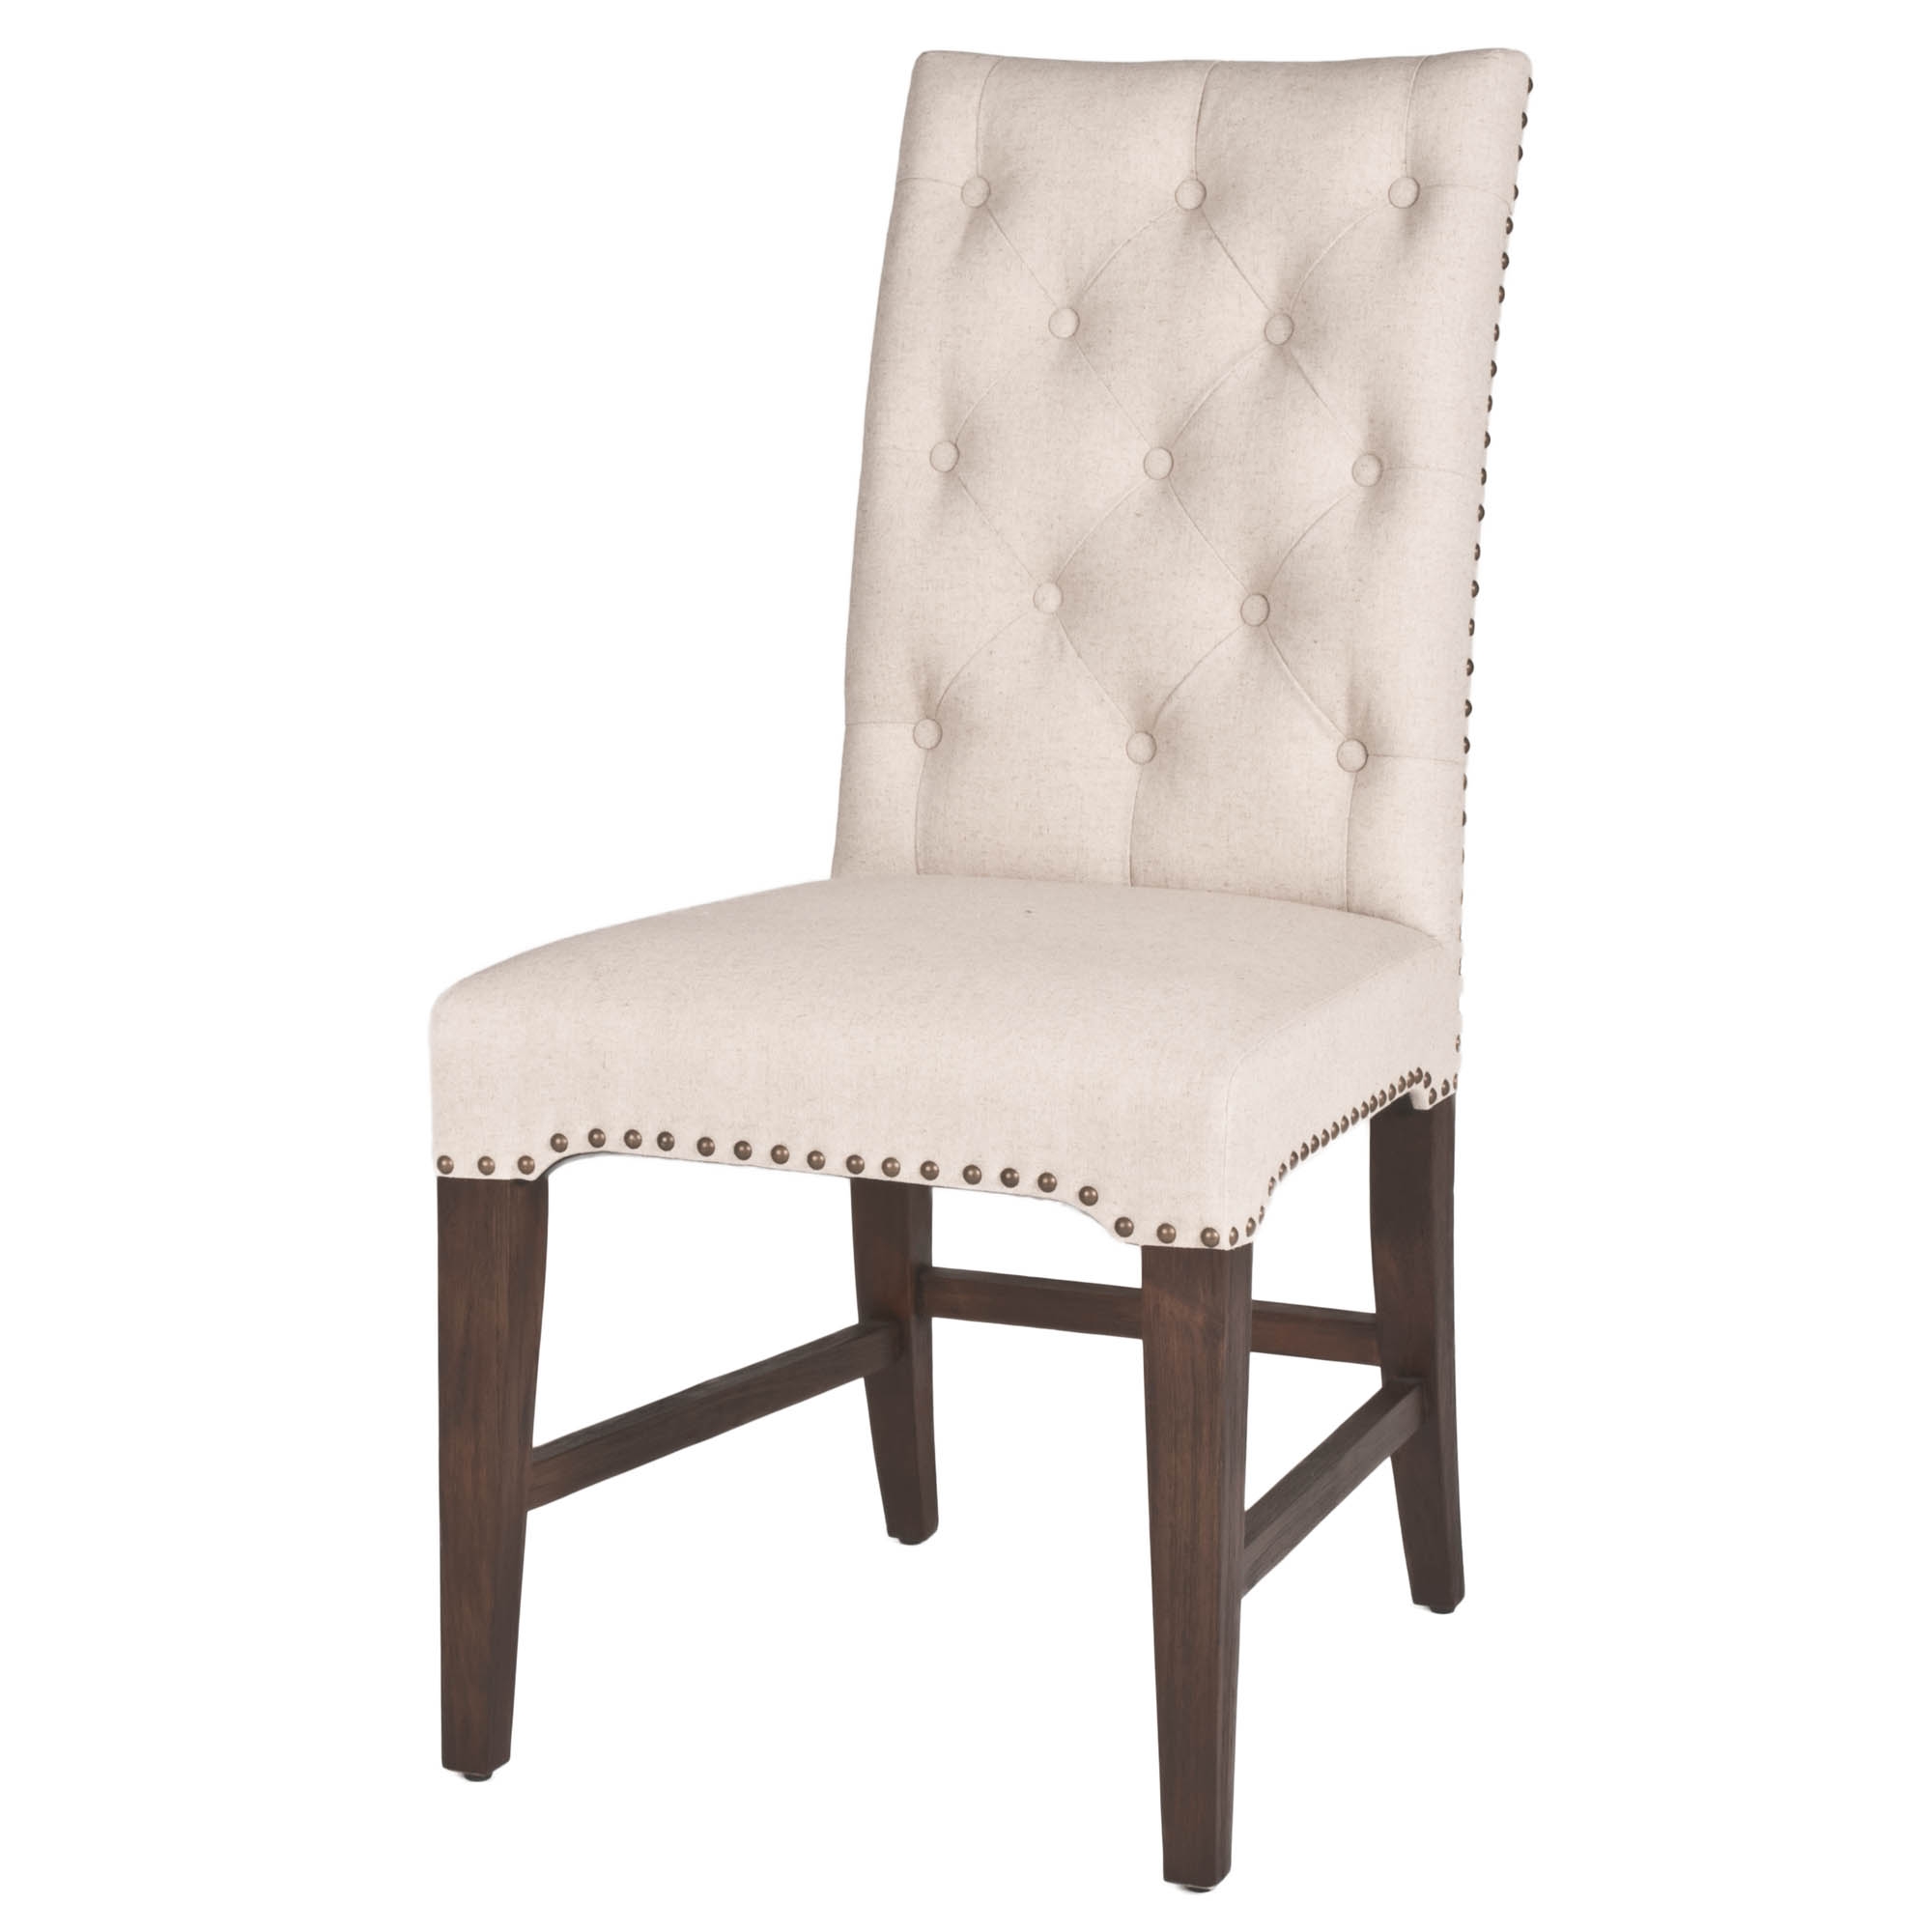 Wilshire Dining Chair, Set of 2 - Image 1